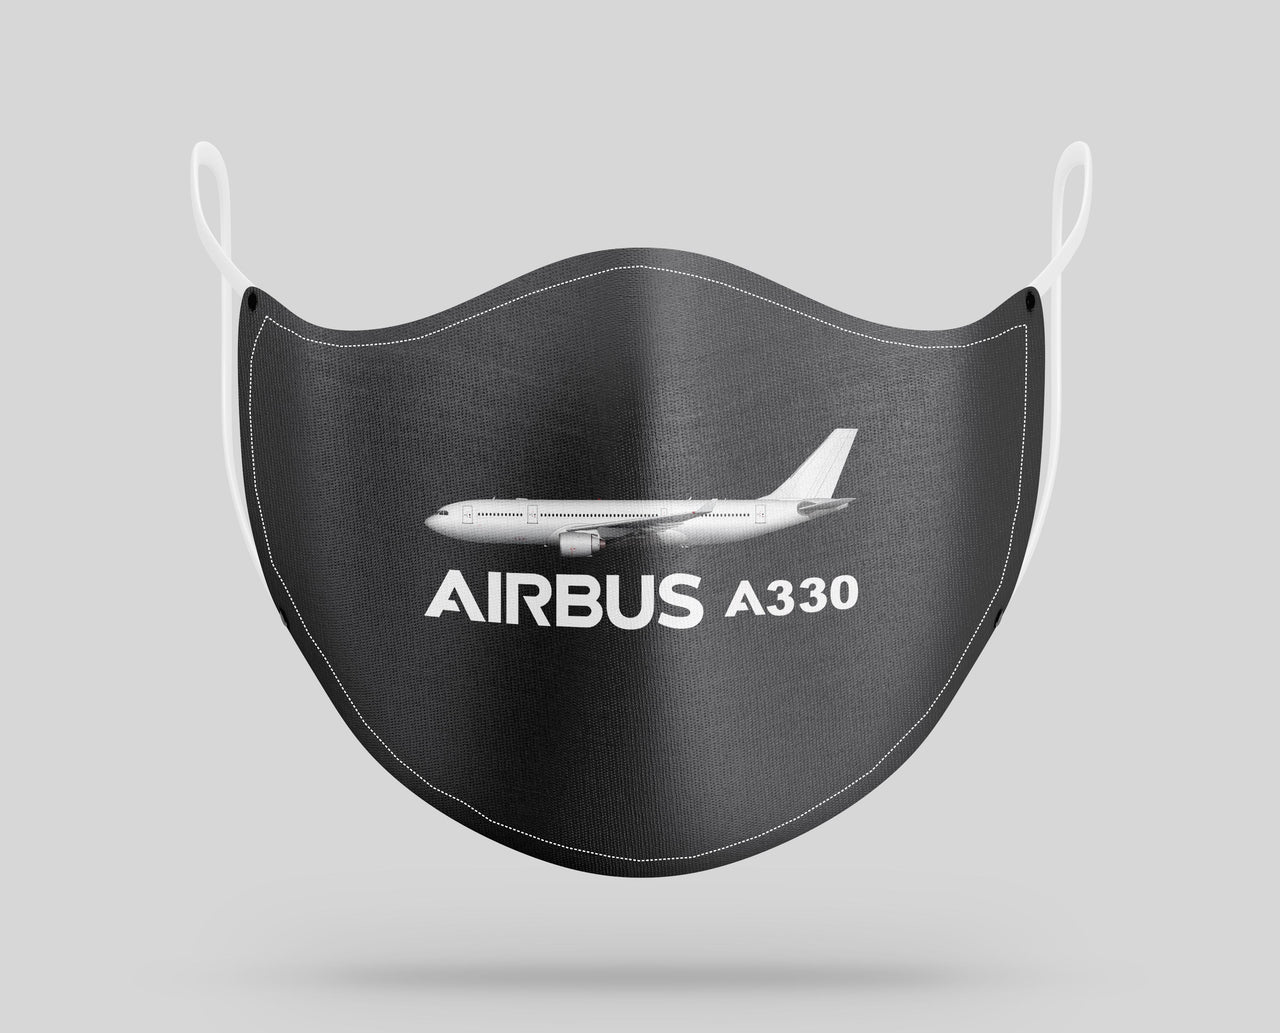 The Airbus A330 Designed Face Masks